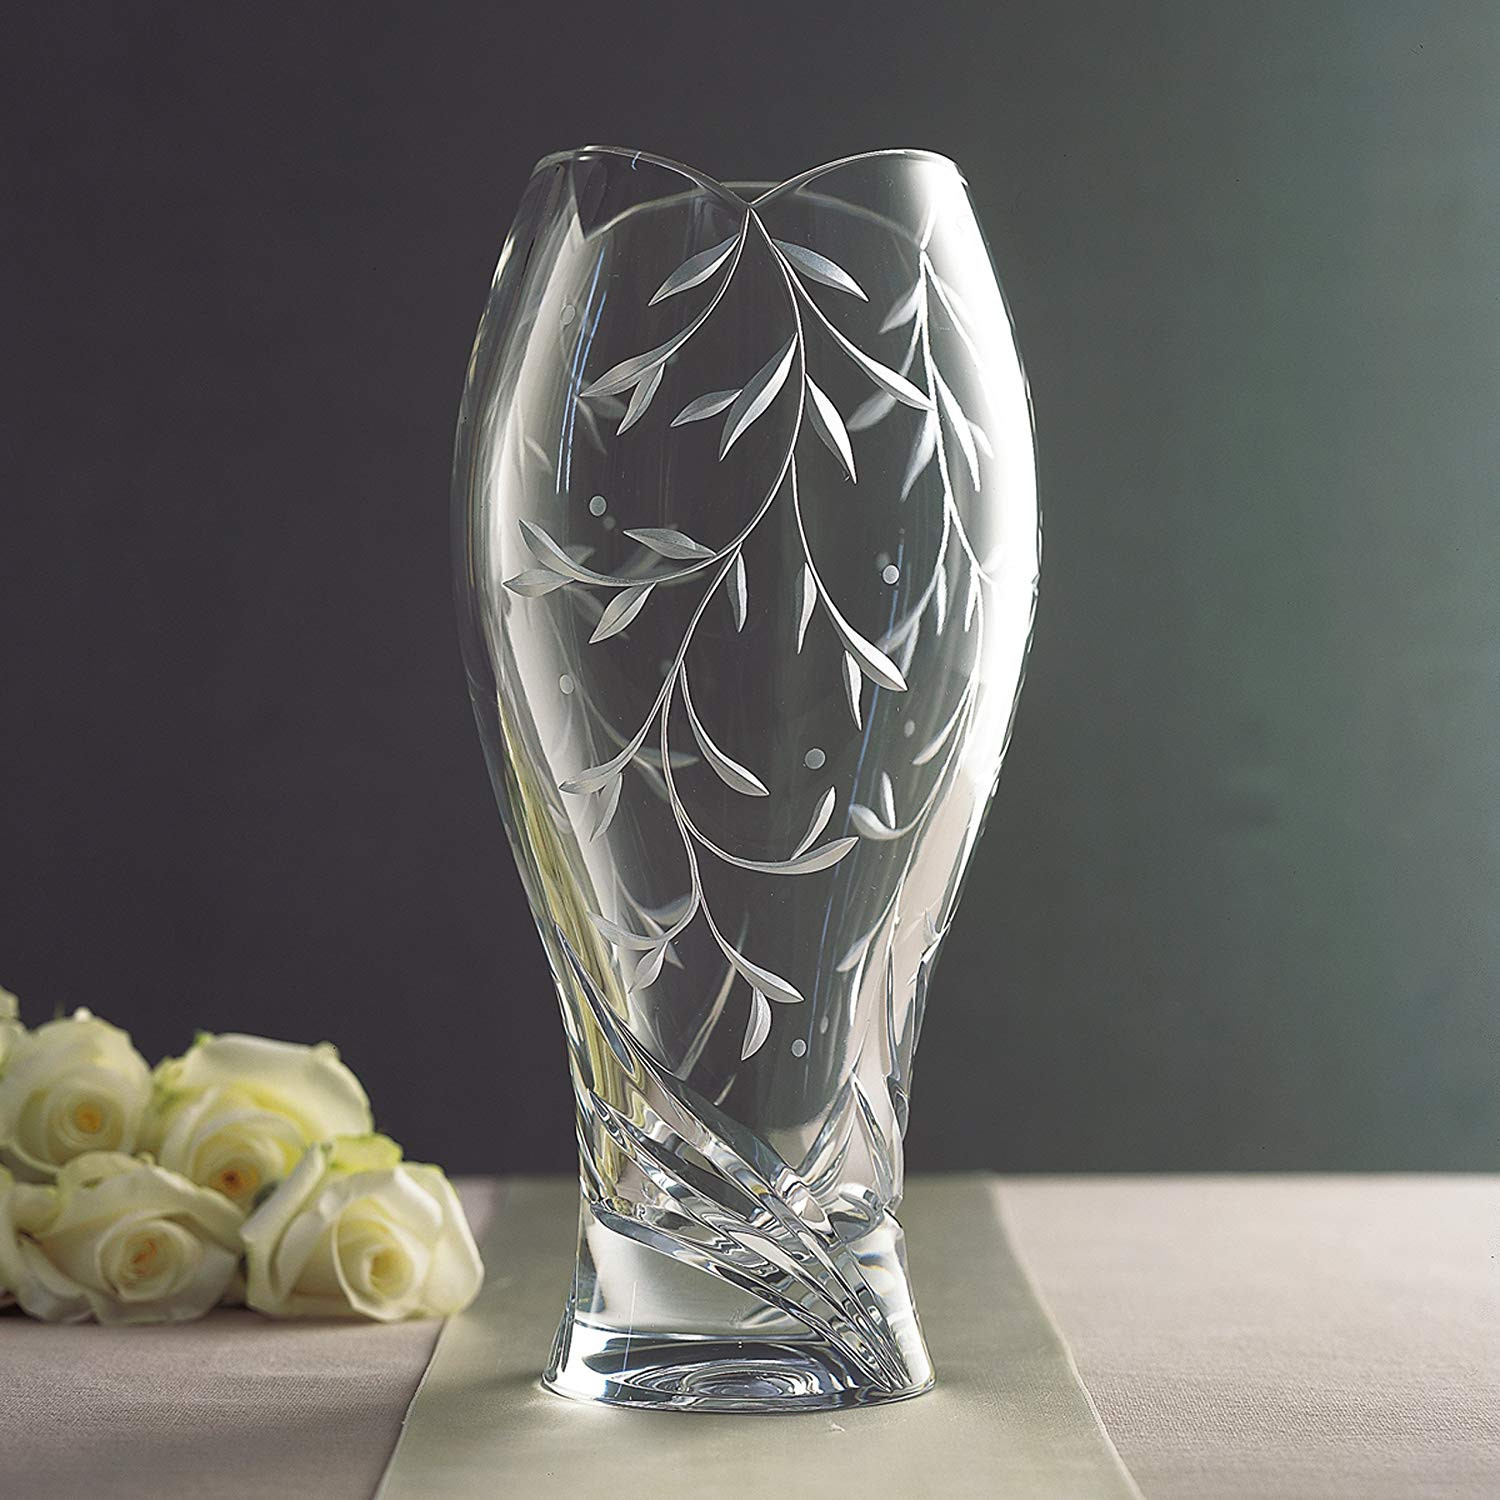 26 Lovable Marquis by Waterford Sheridan Flared 11 Inch Vase 2024 free download marquis by waterford sheridan flared 11 inch vase of amazon com lenox opal innocence crystal vase decorative vases pertaining to amazon com lenox opal innocence crystal vase decorative vases